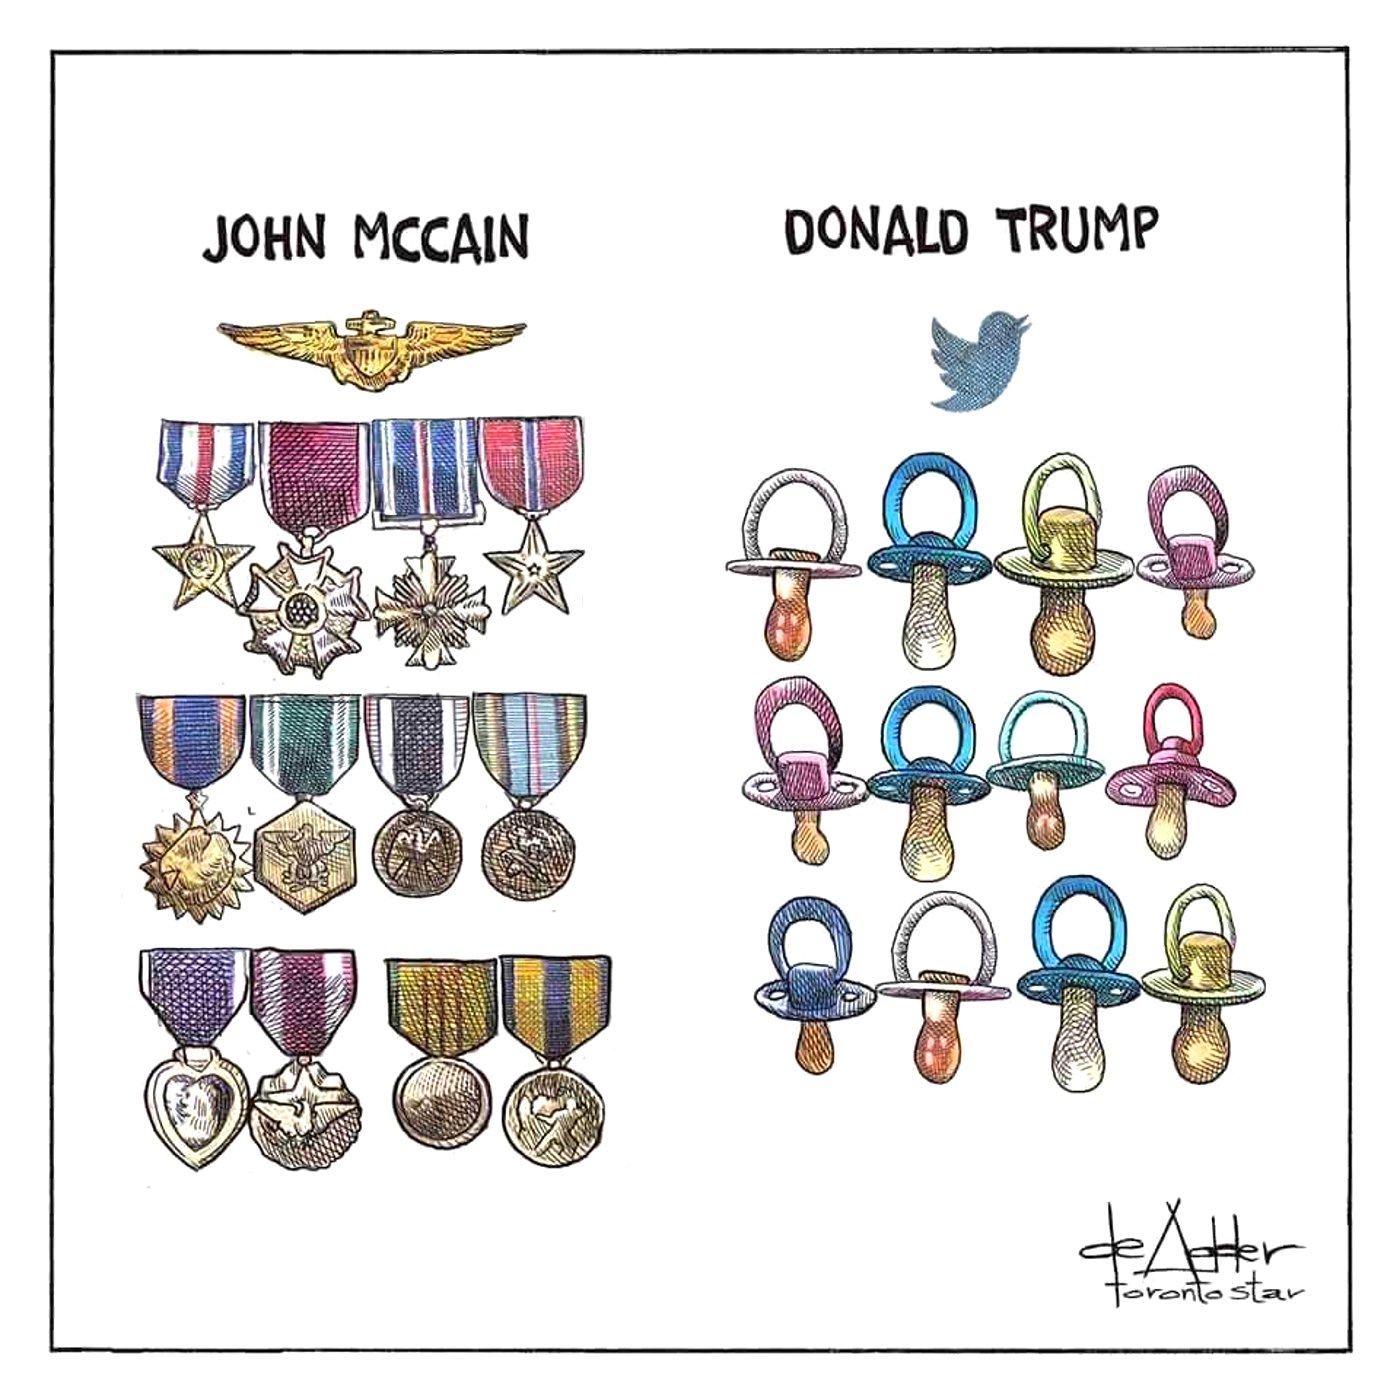 John served in Vietnam while Drumpf served Big Macs to feed his bone spurs. John became a hero while Drumpf became a racist parasite.